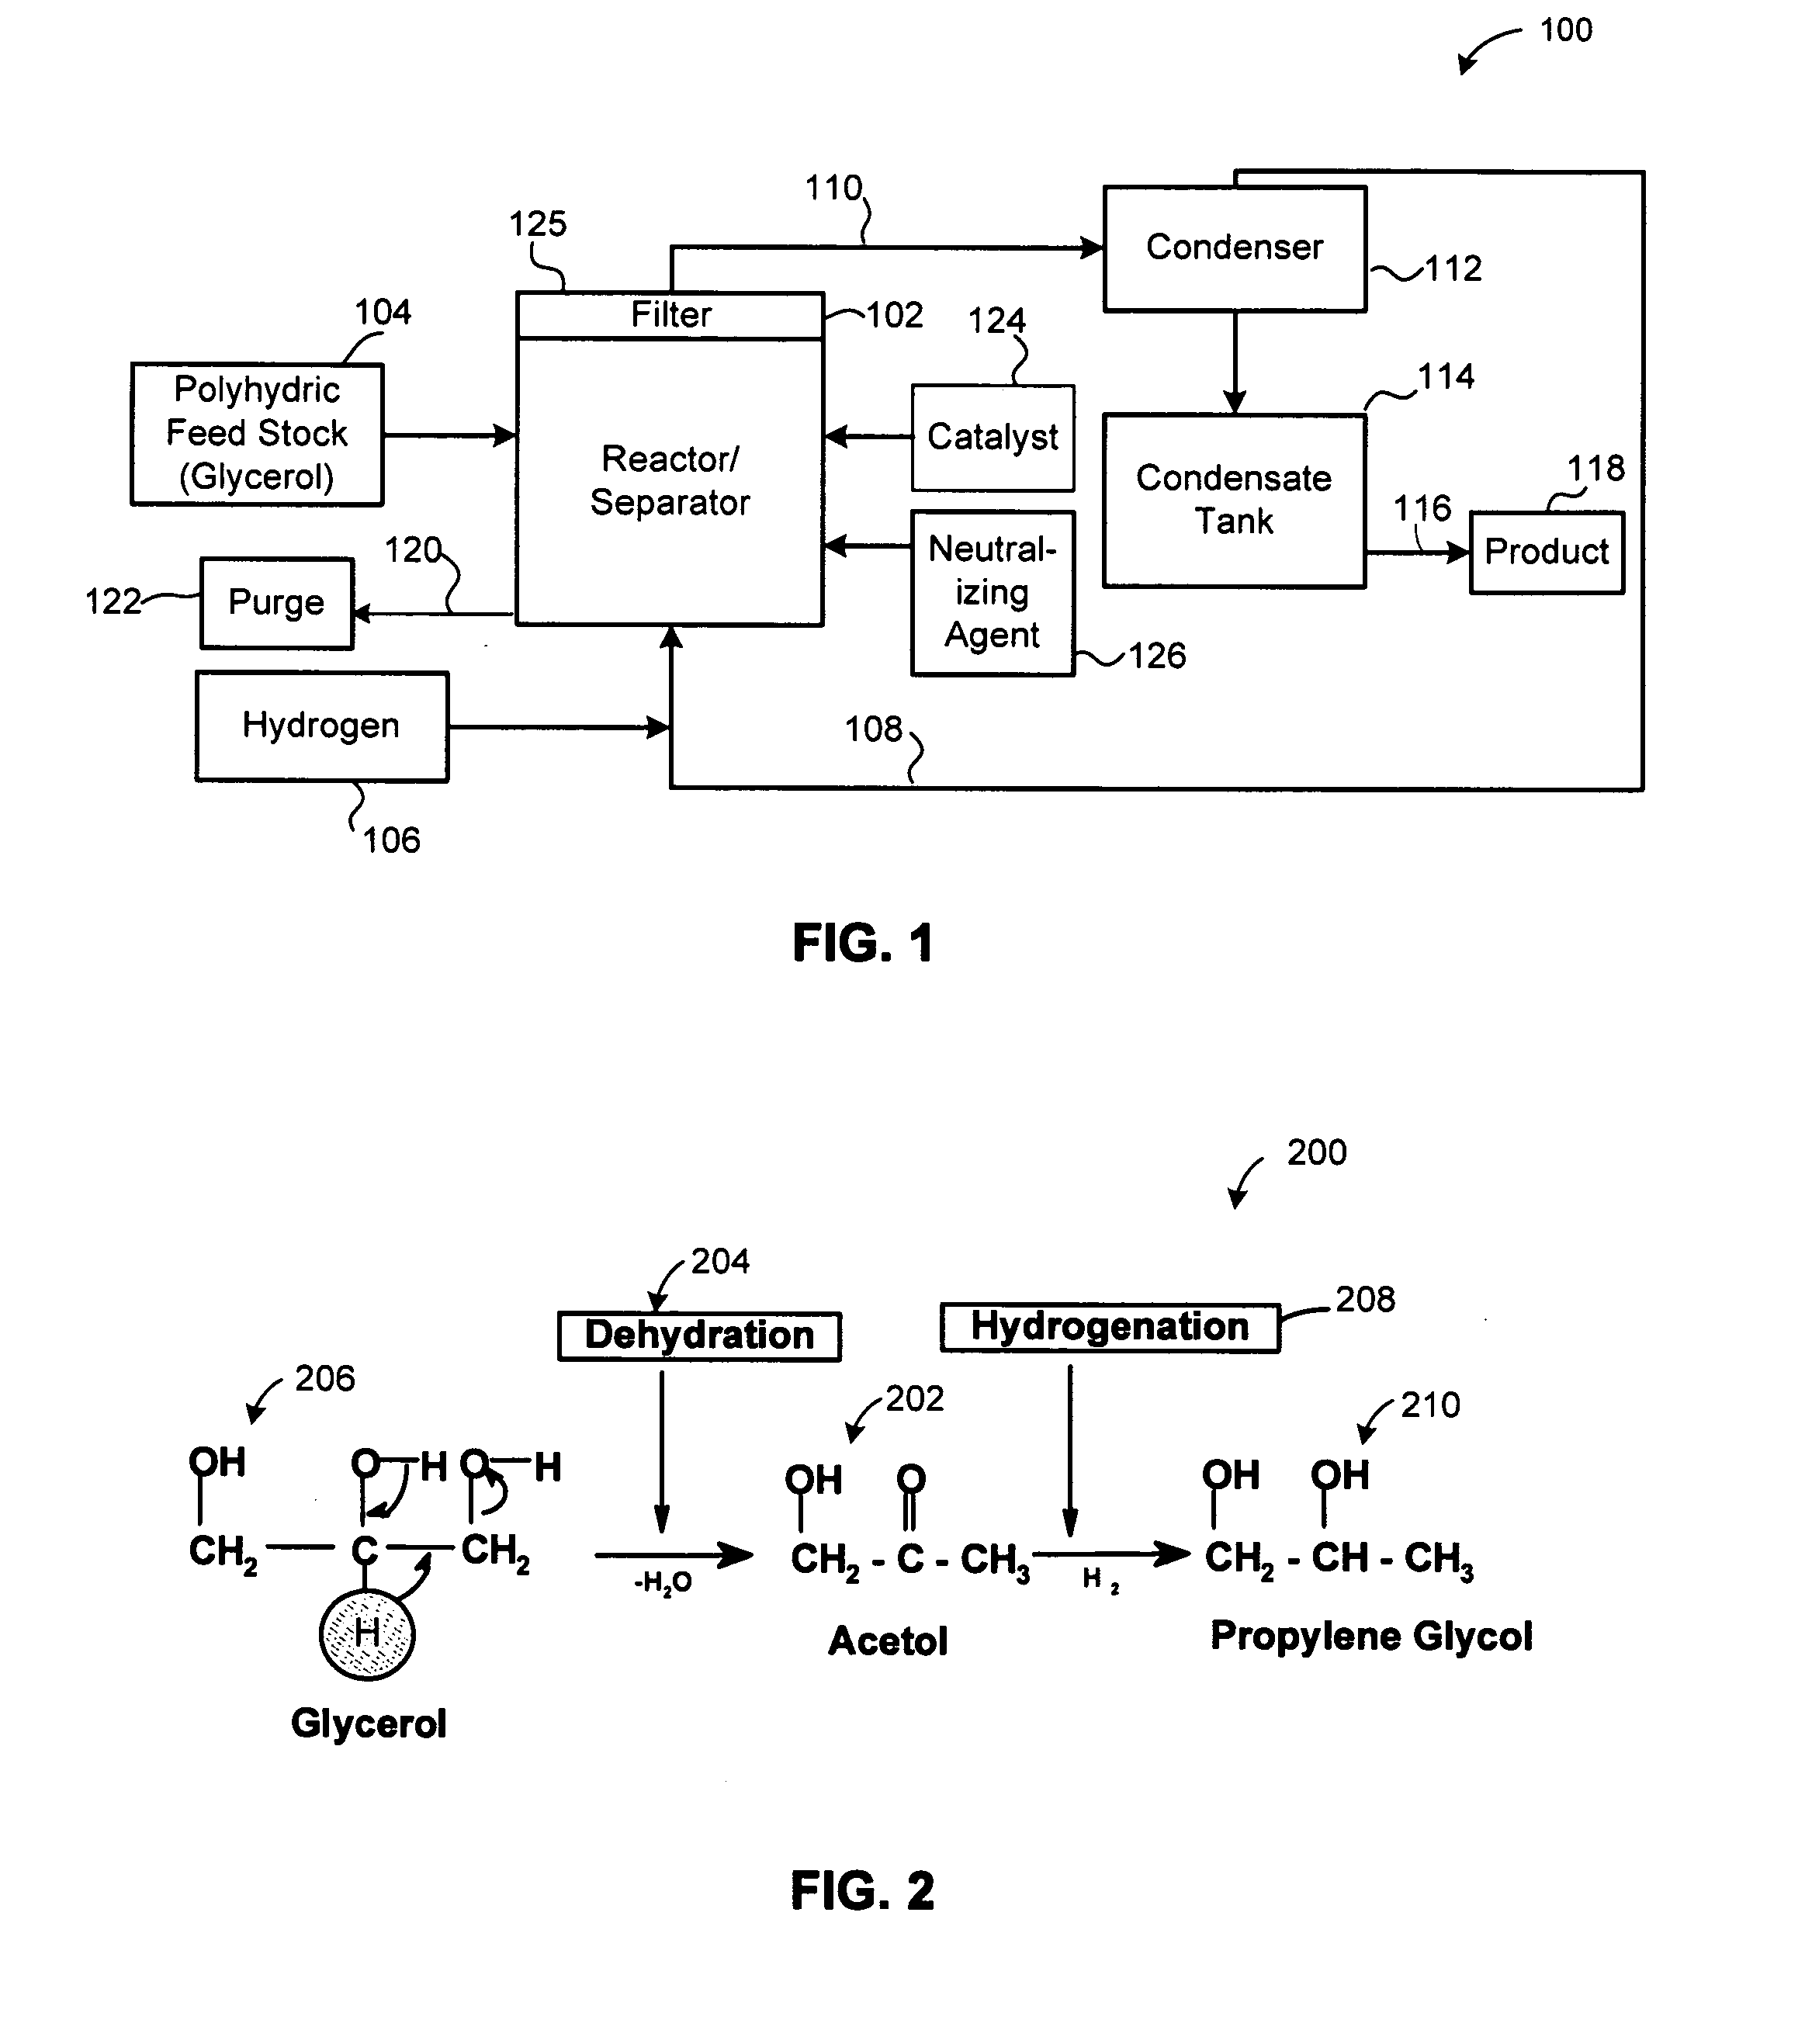 Method of producing lower alcohols from glycerol